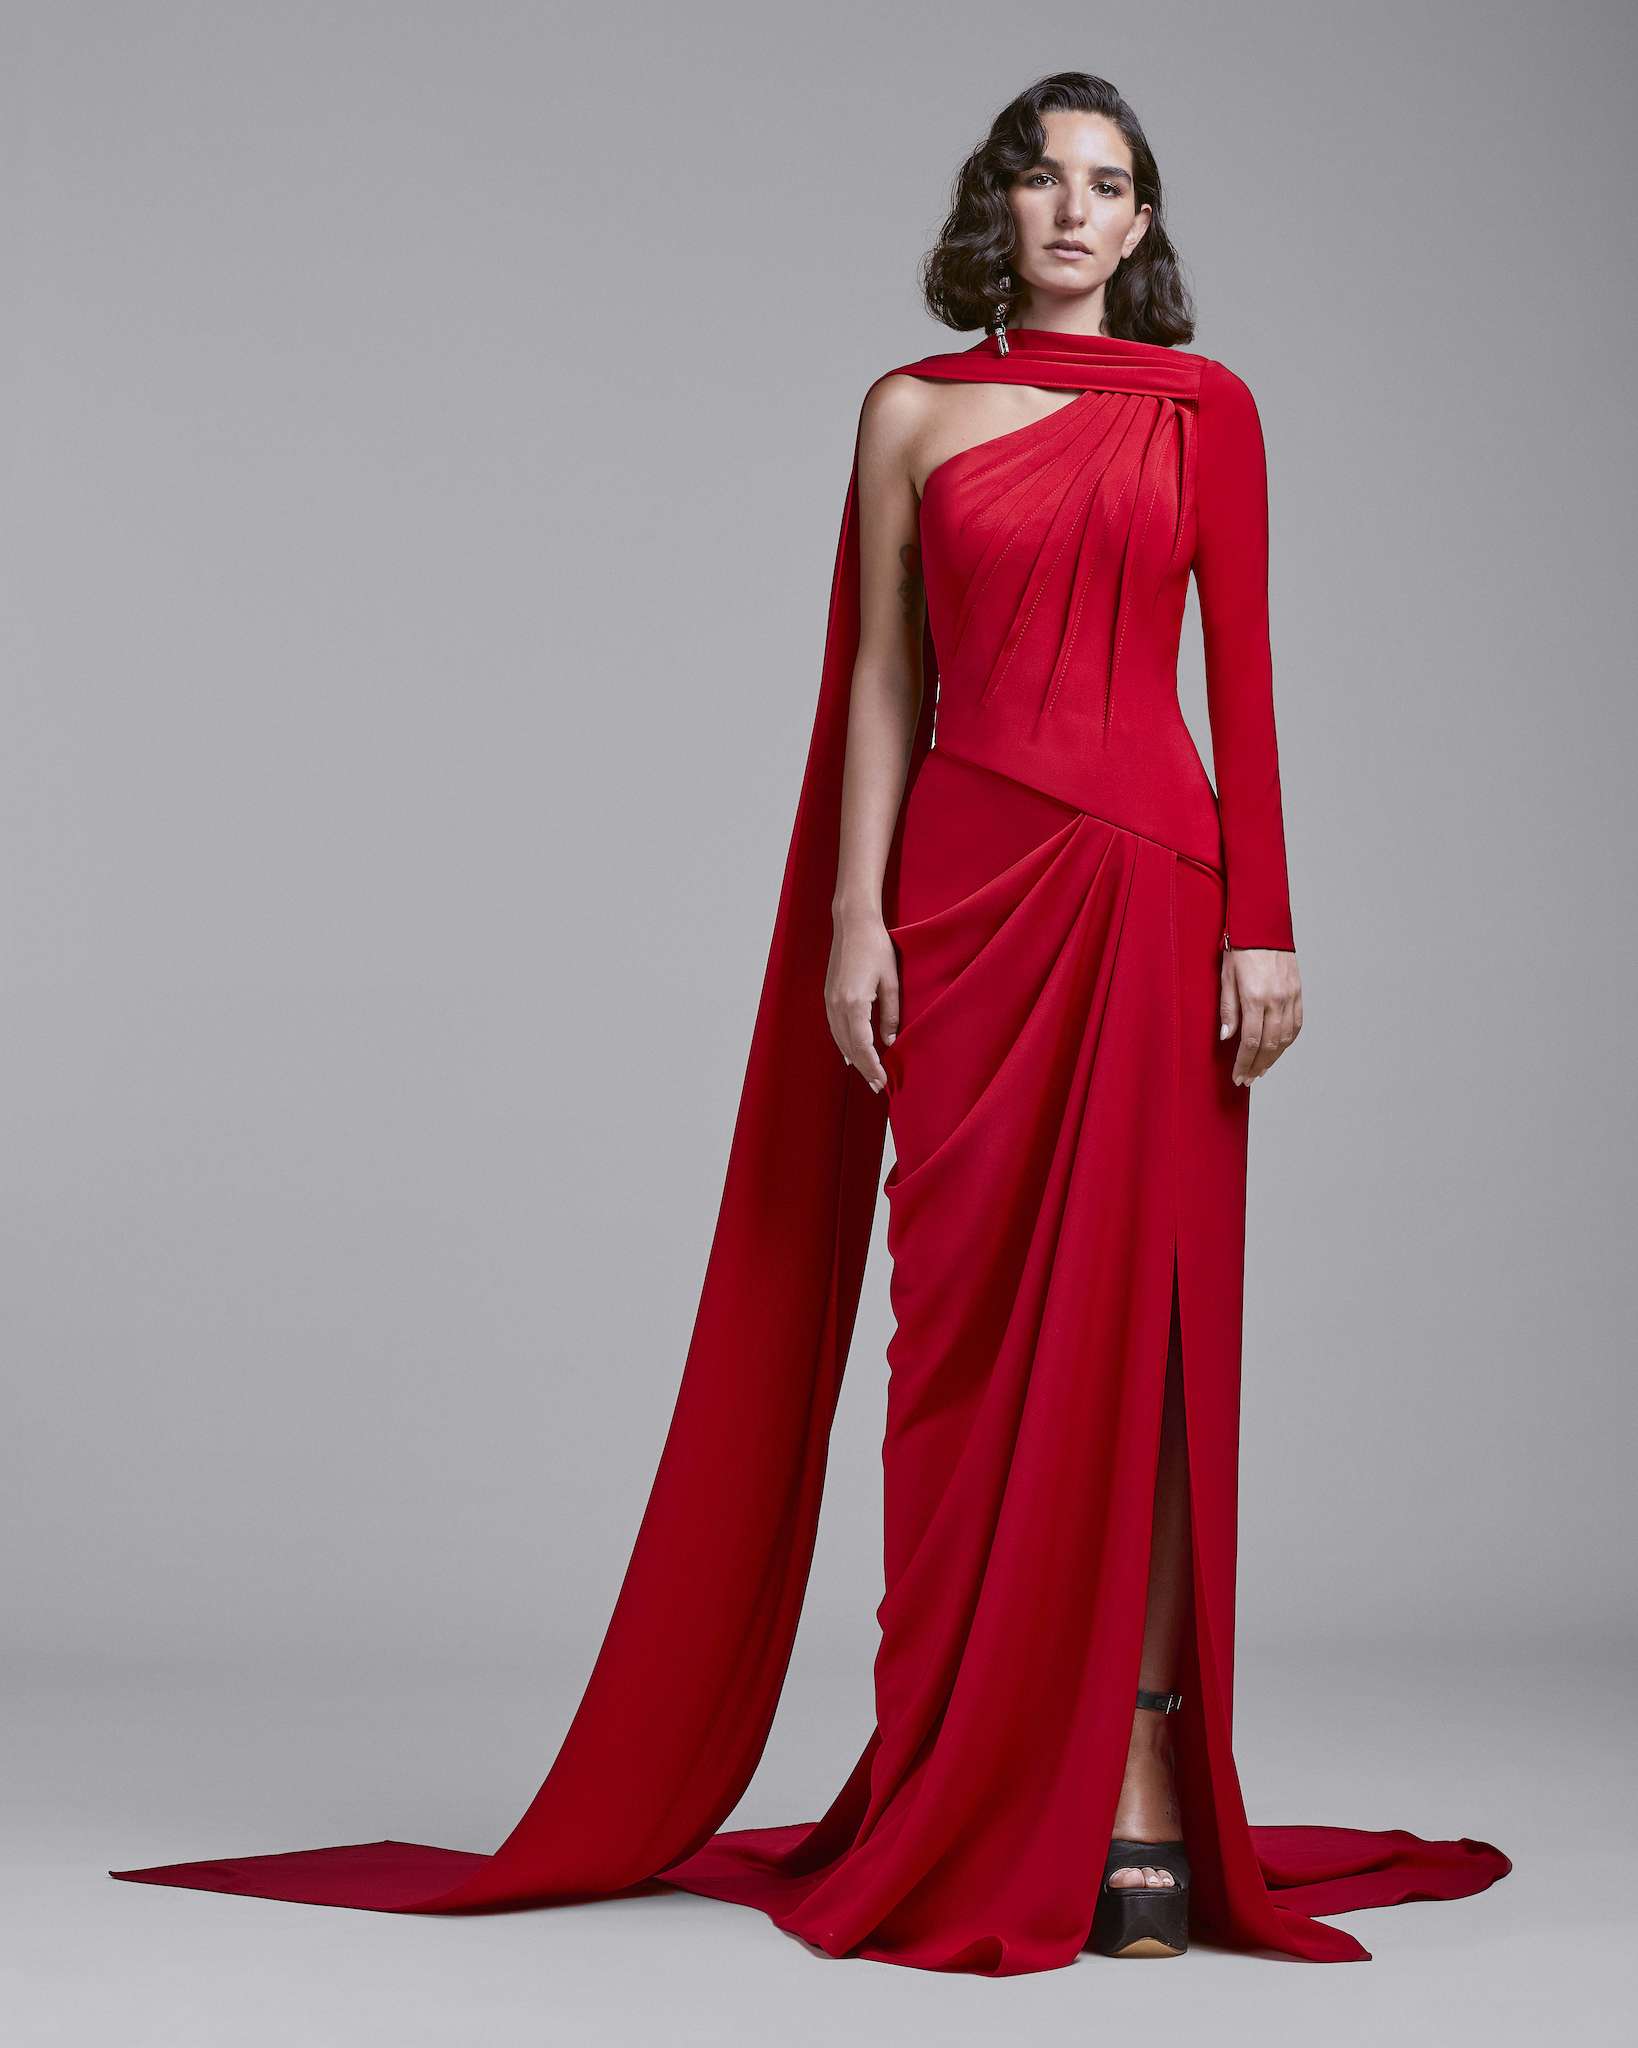 Georges Chakra Fall Winter 2020-21 Haute Couture Lookbook